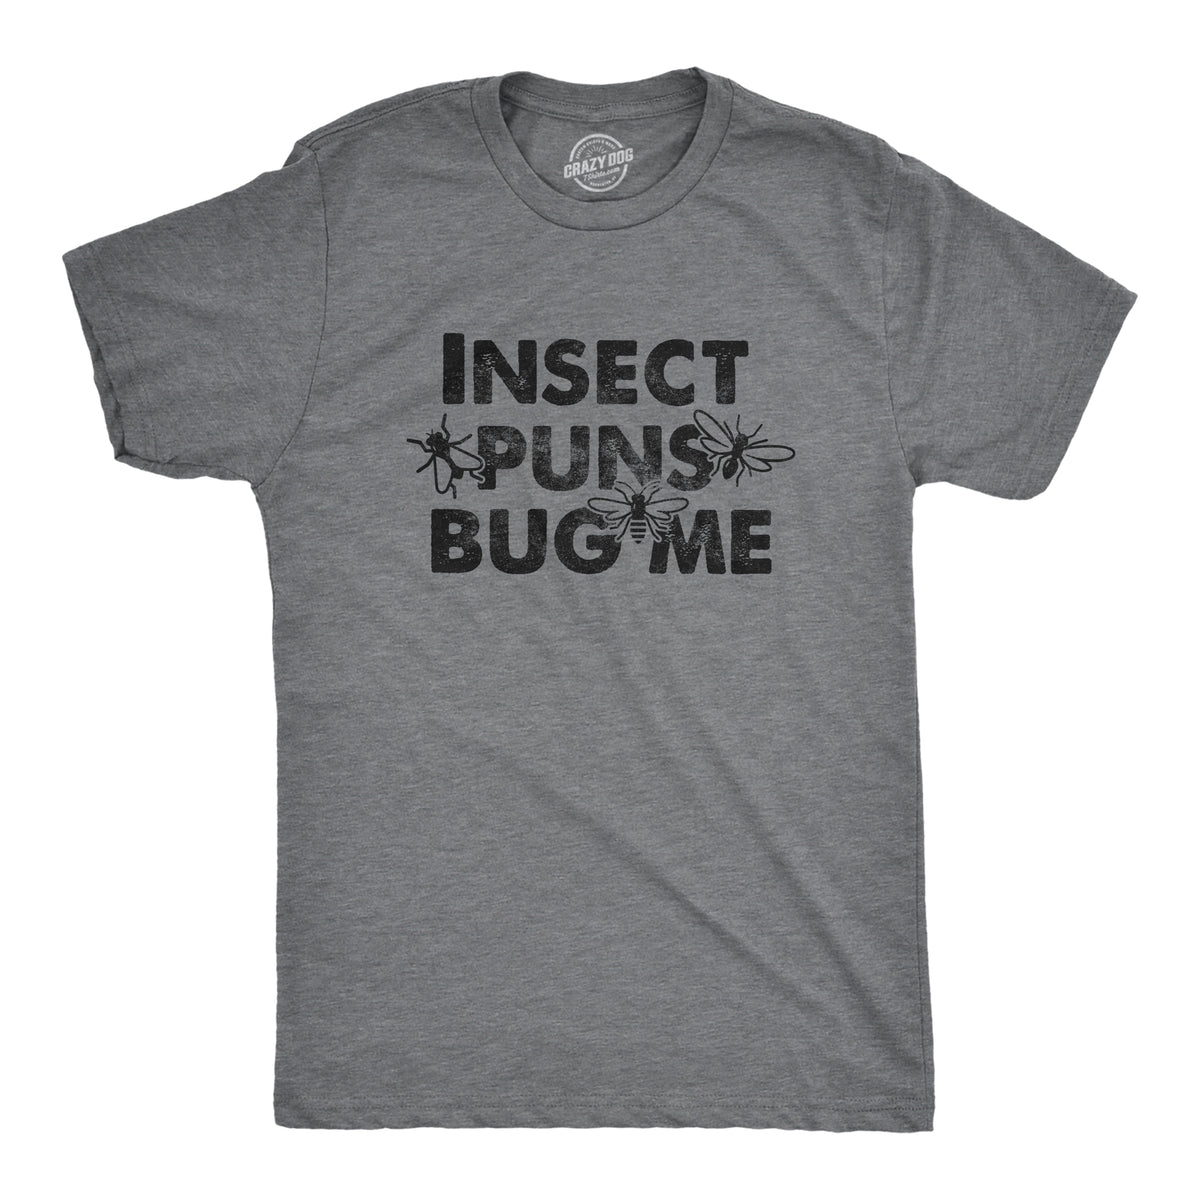 Funny Dark Heather Grey - INSECT Insect Puns Bug Me Mens T Shirt Nerdy sarcastic Tee